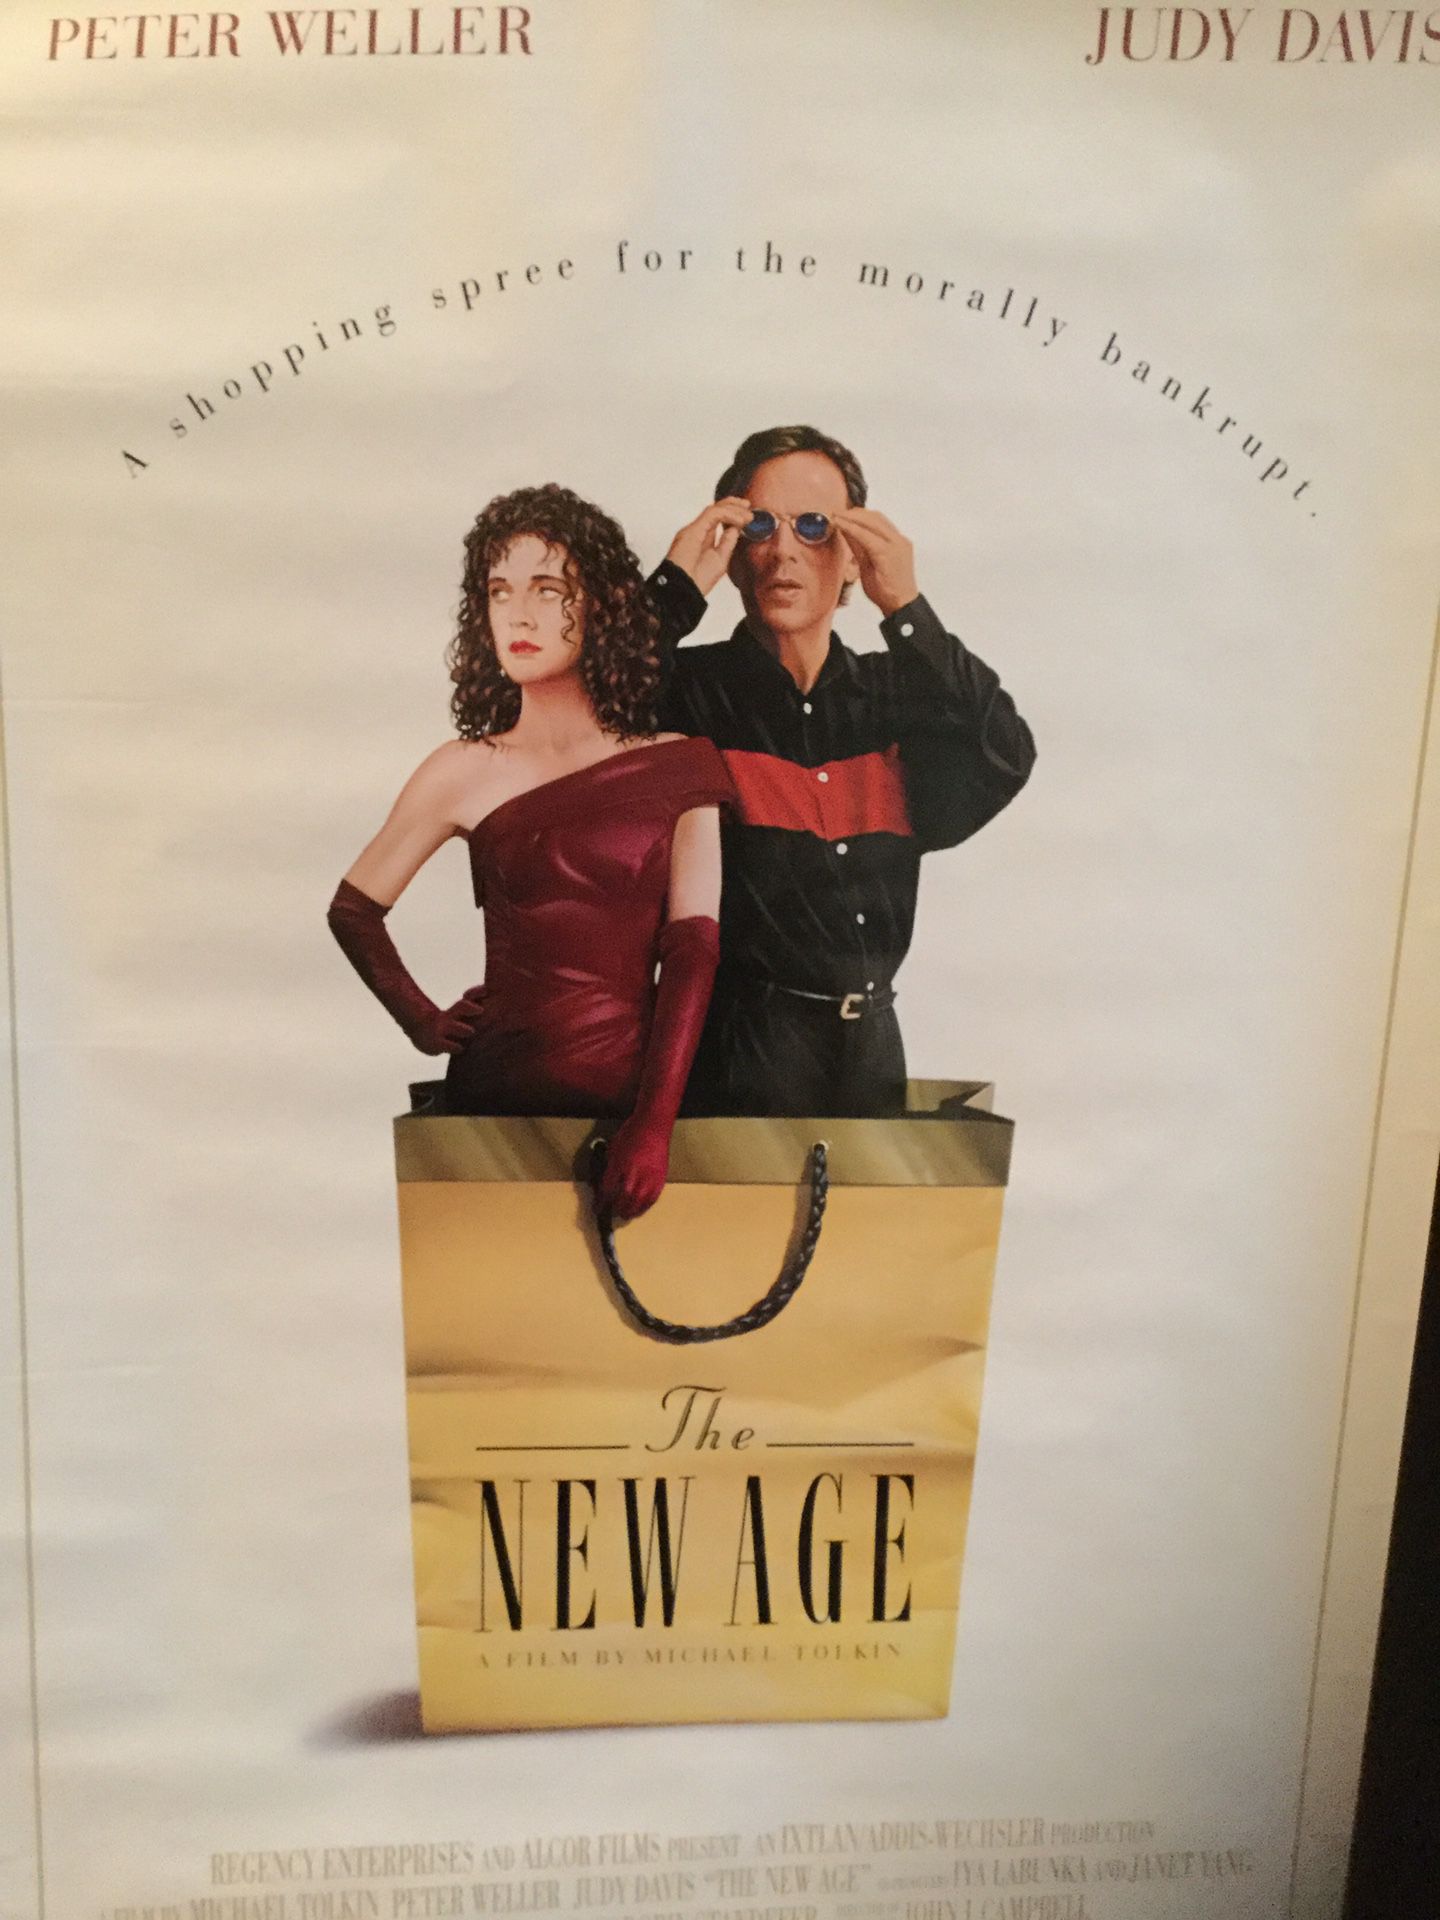 MOVIE POSTER - The New Age Peter Weller Video Store